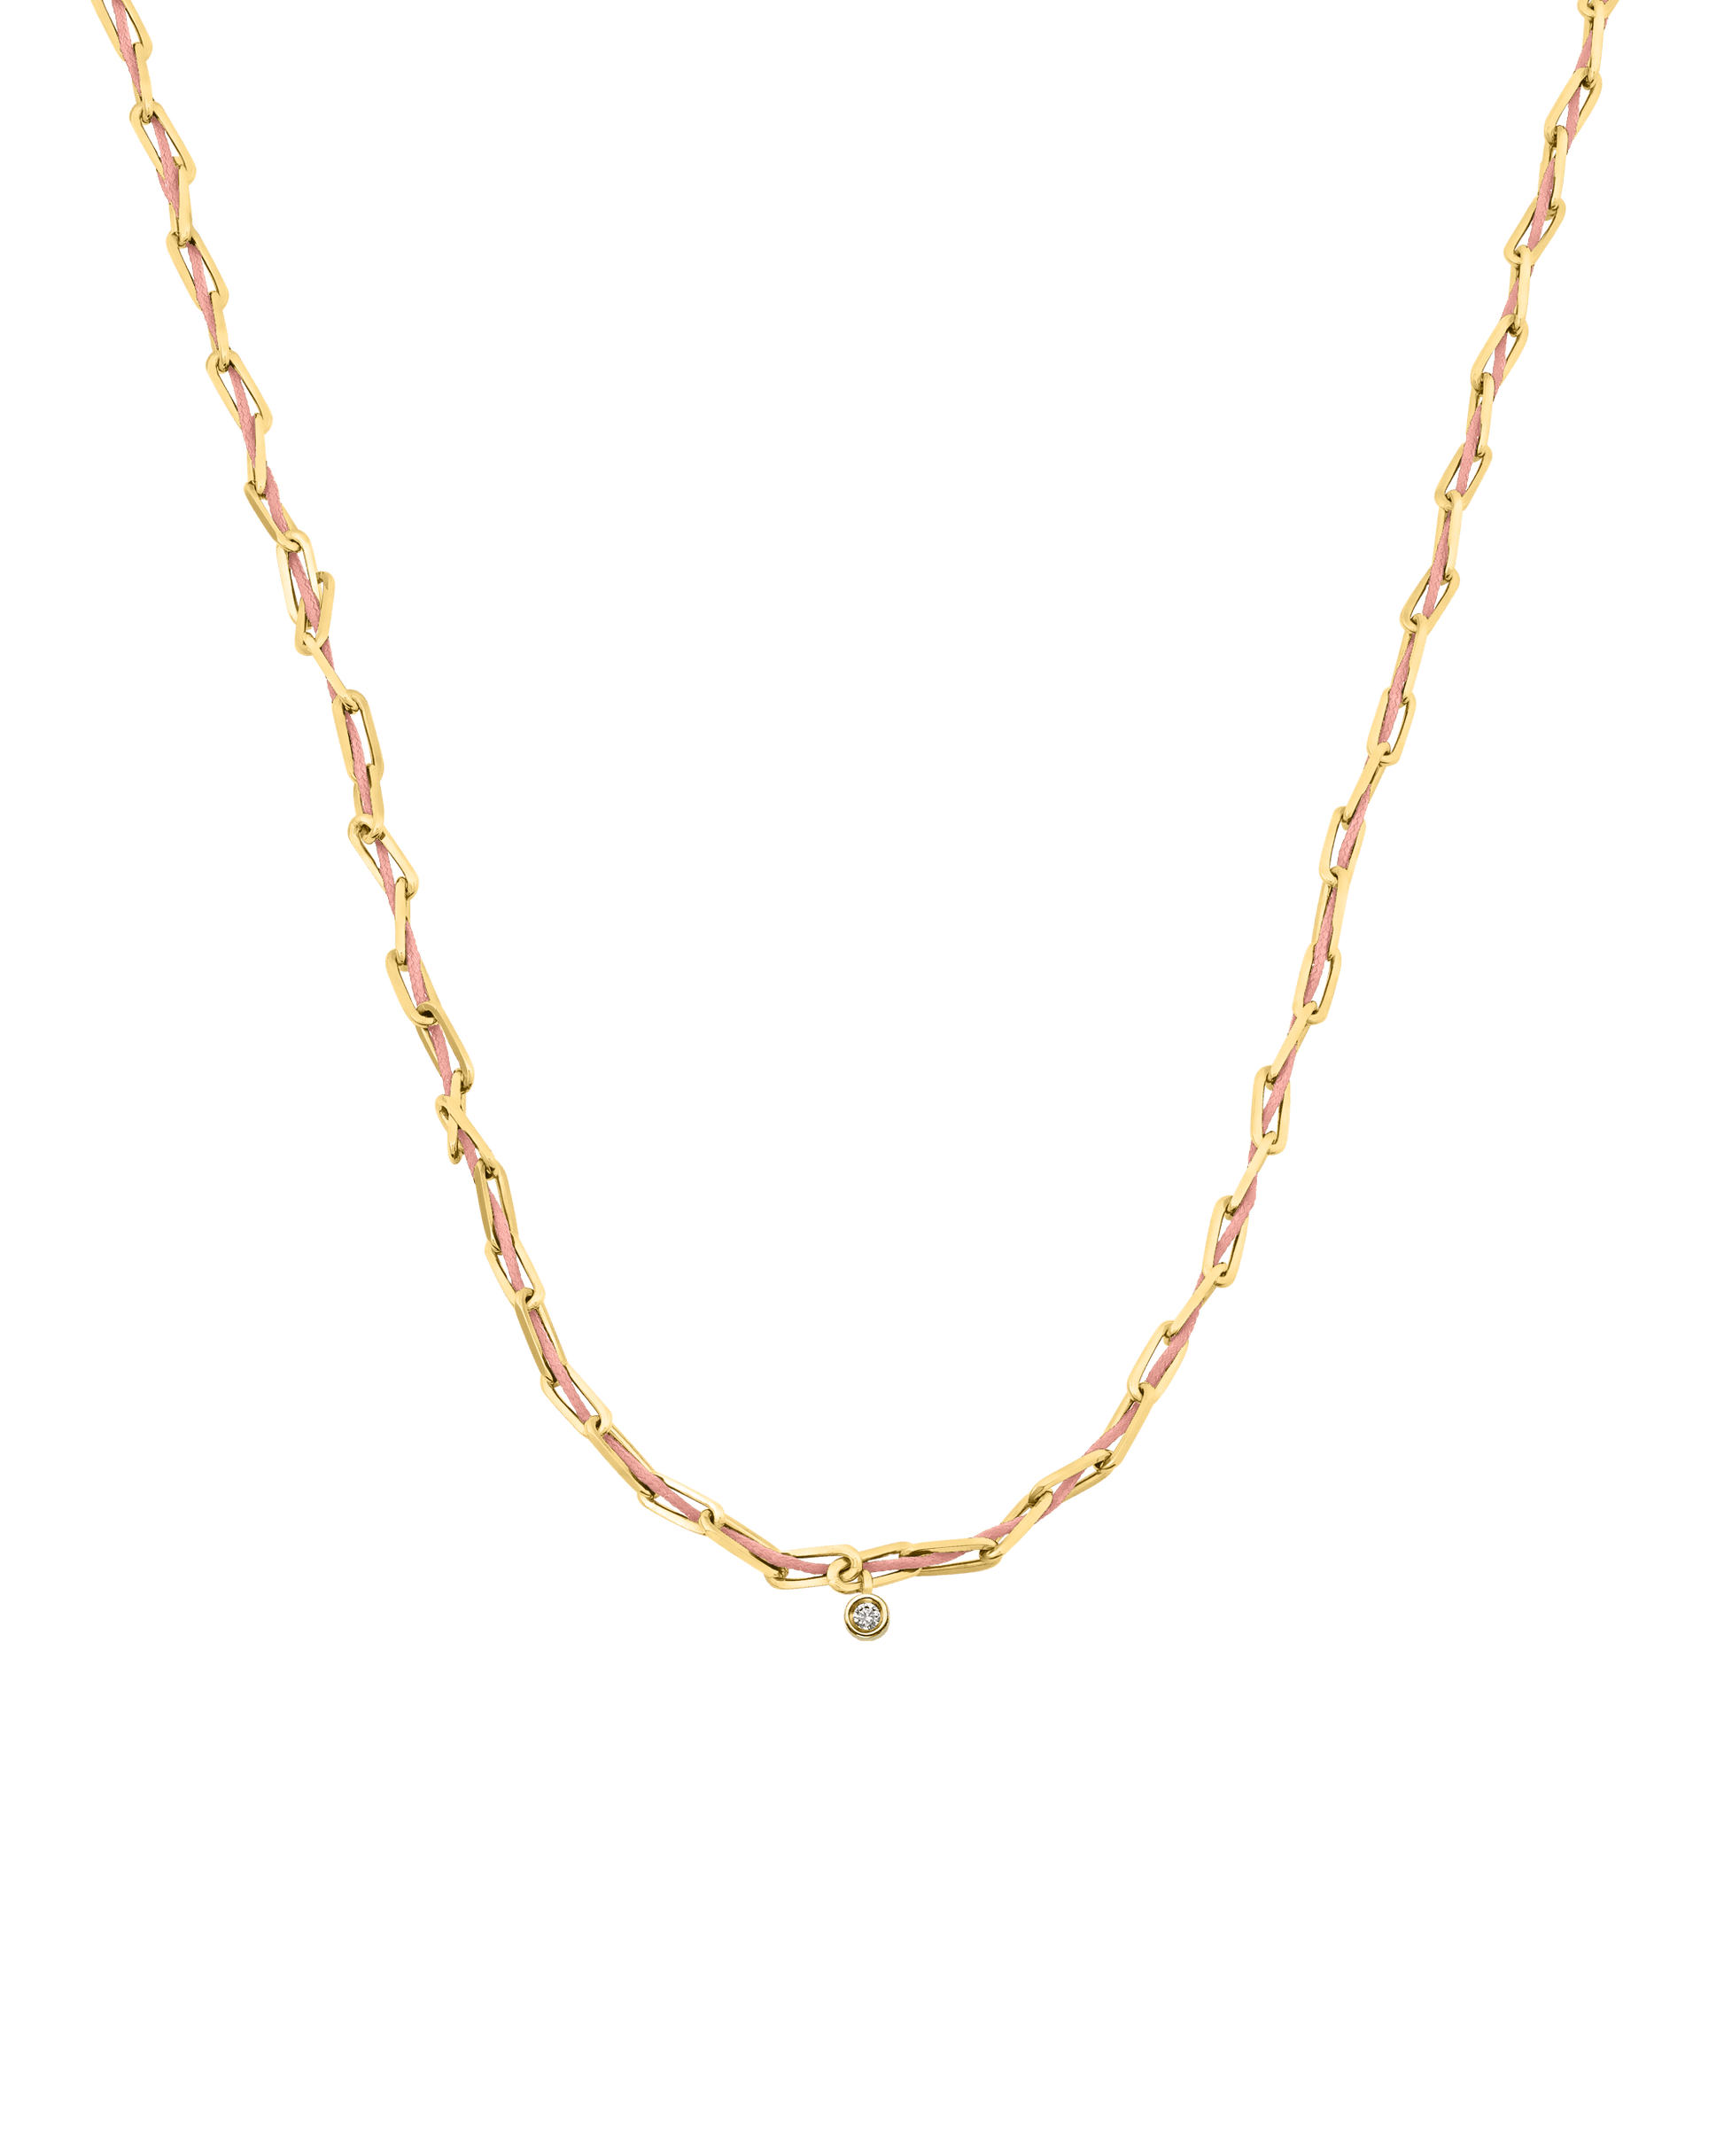 Twine Diamond Necklace - 18K Gold Vermeil Necklaces magal-dev Pink Small: 0.03ct 16"